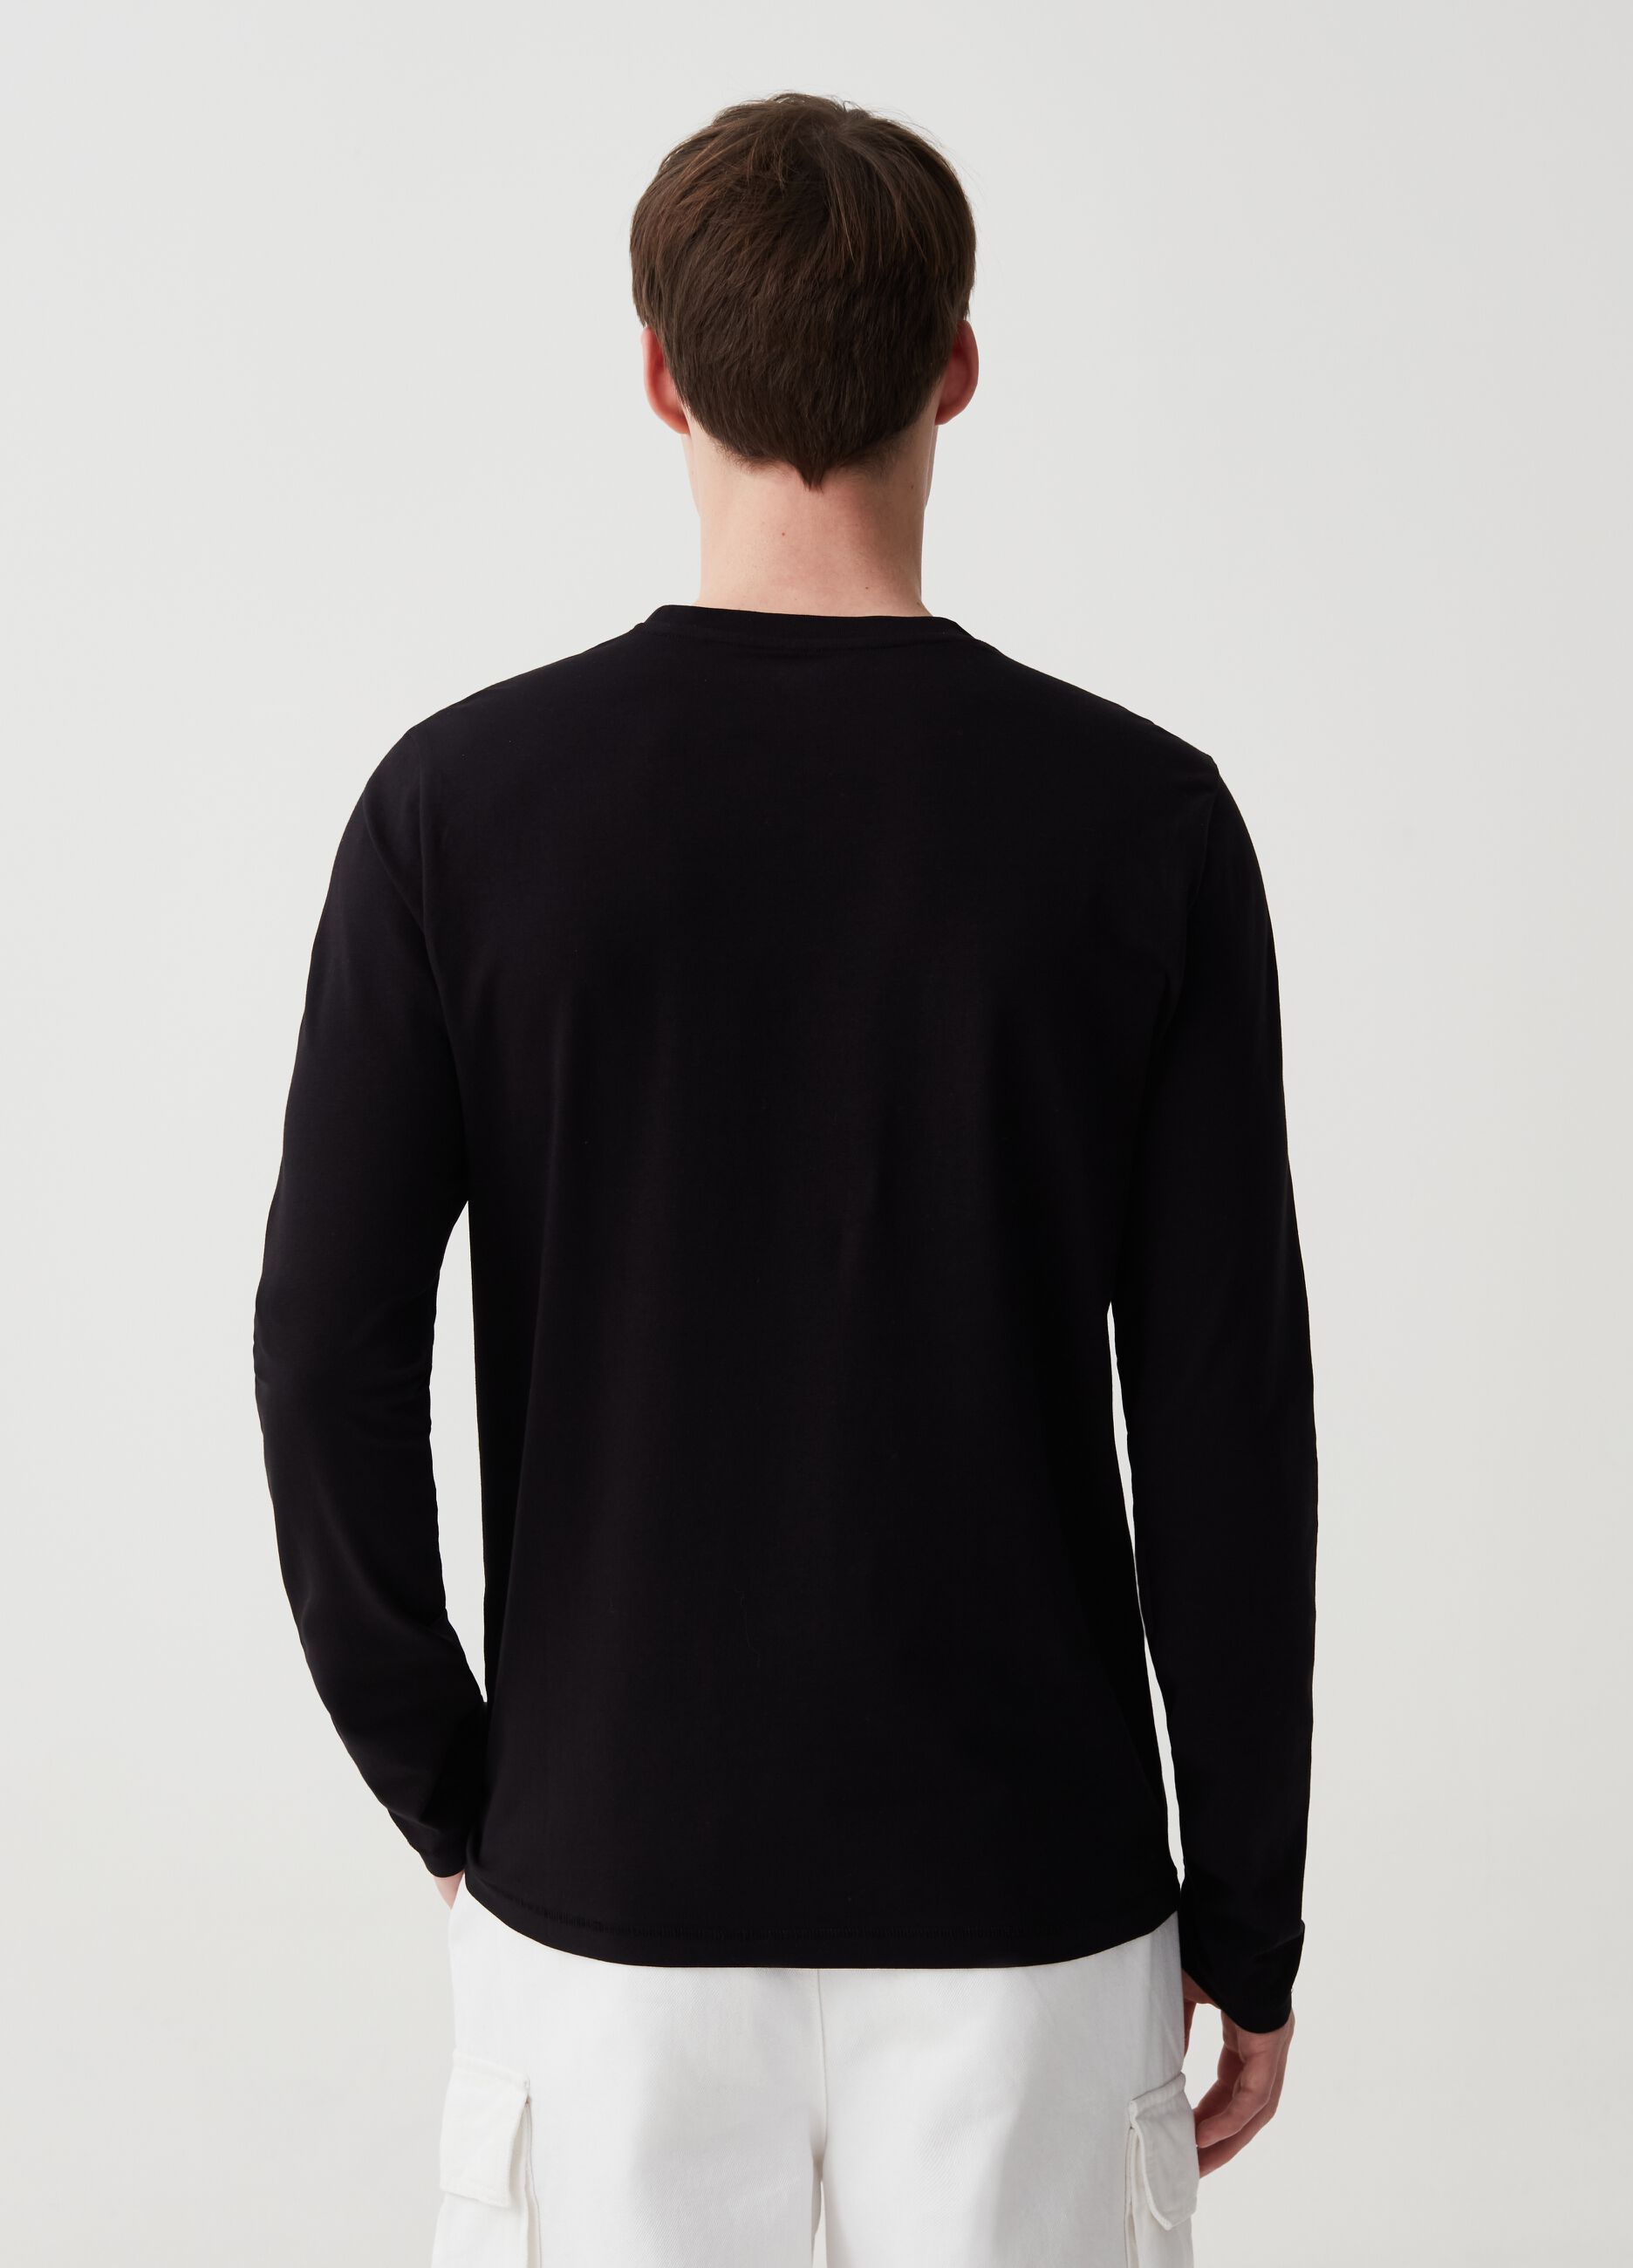 Long-sleeved T-shirt in jersey